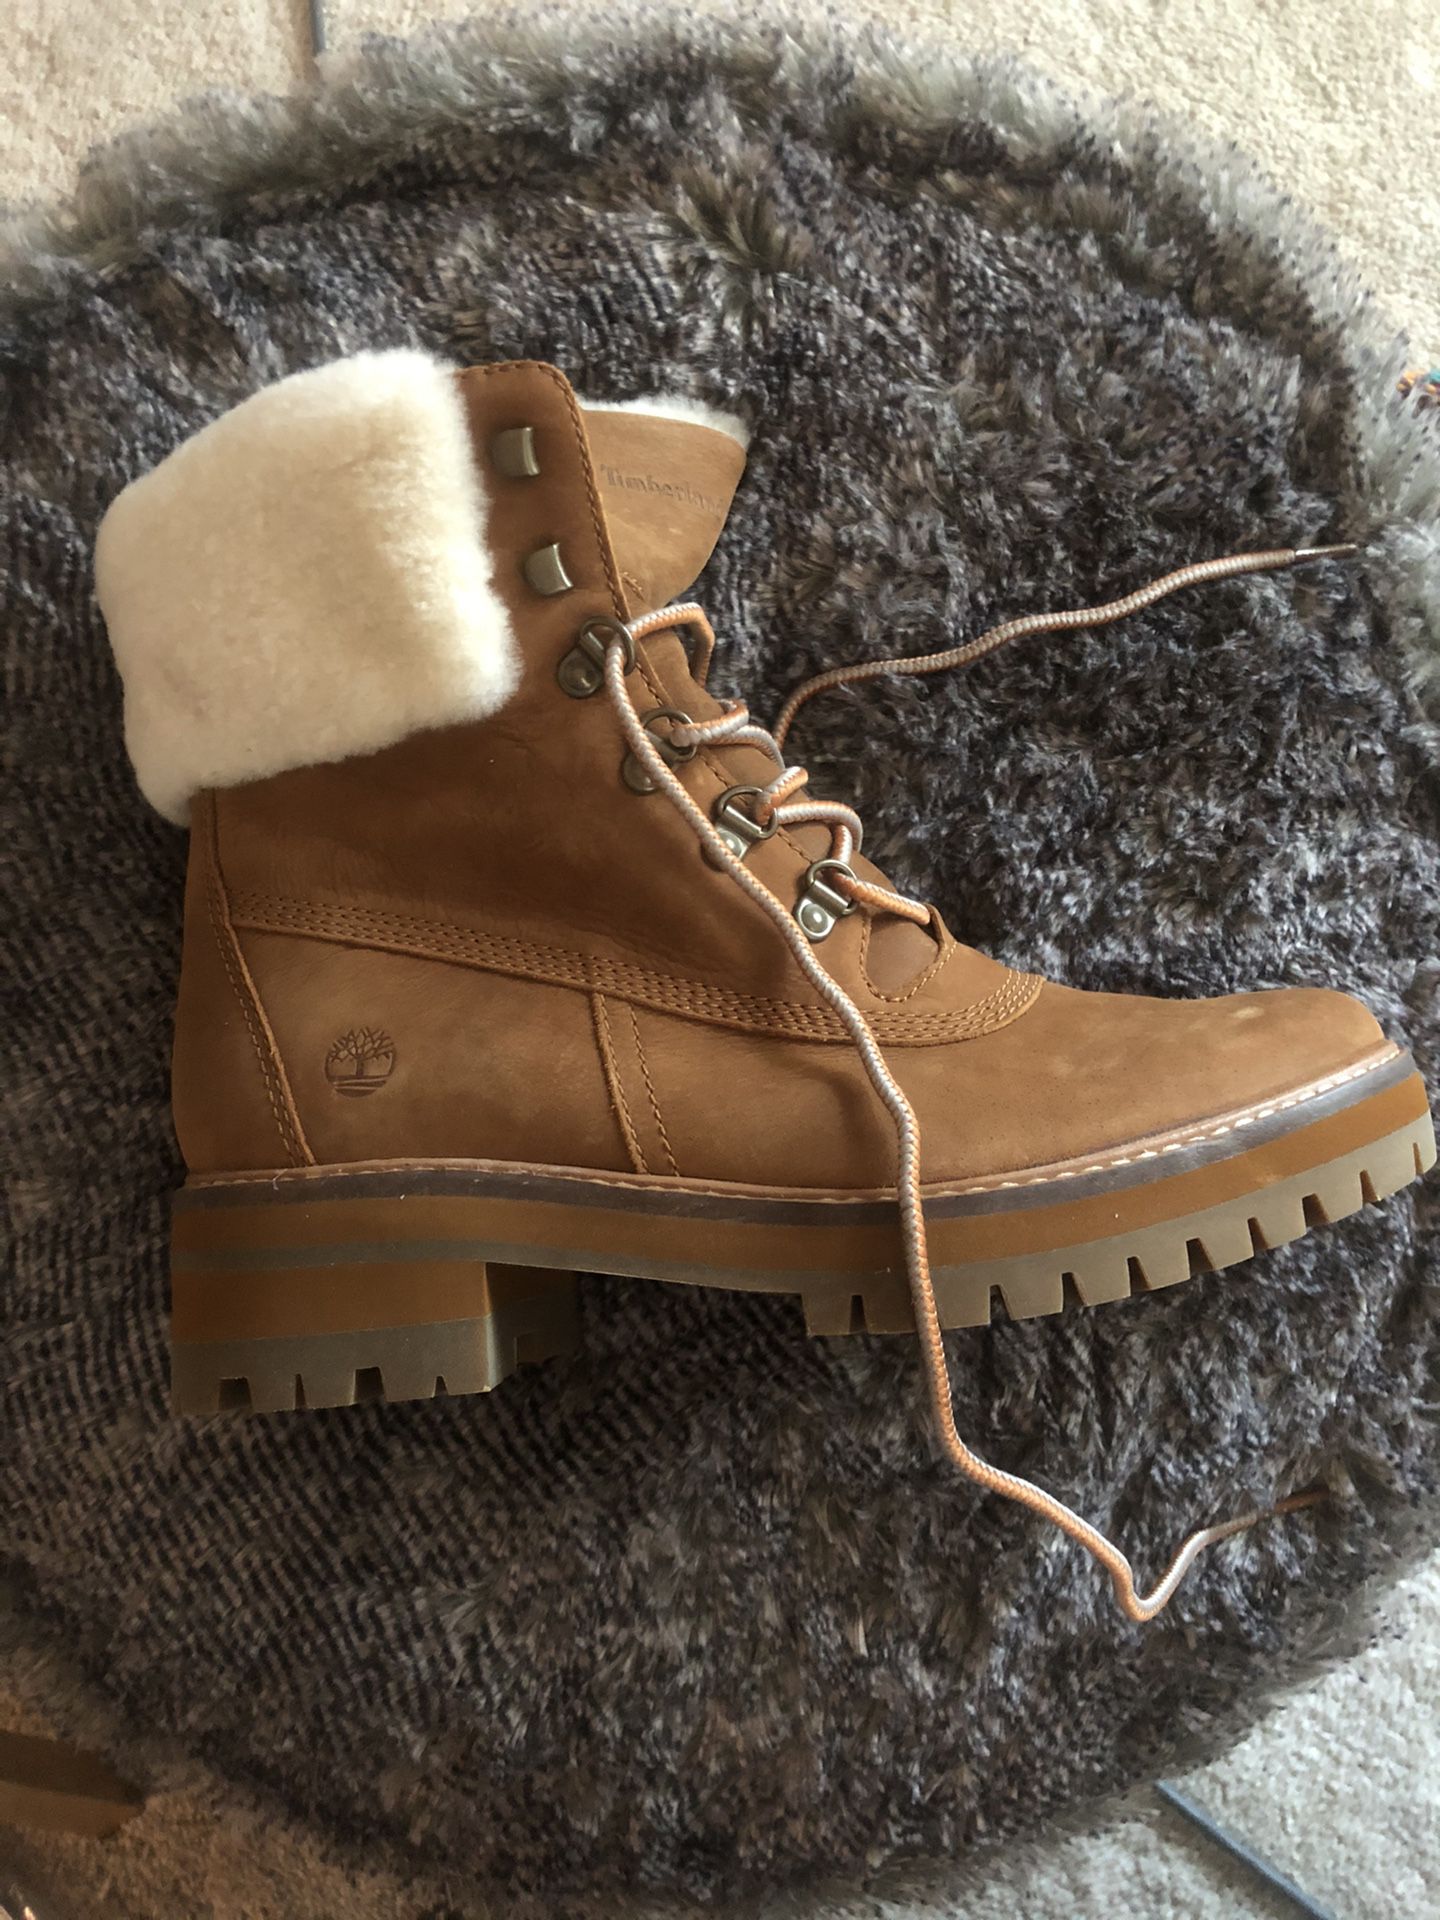 Women’s Timberland boots size 9. New in box